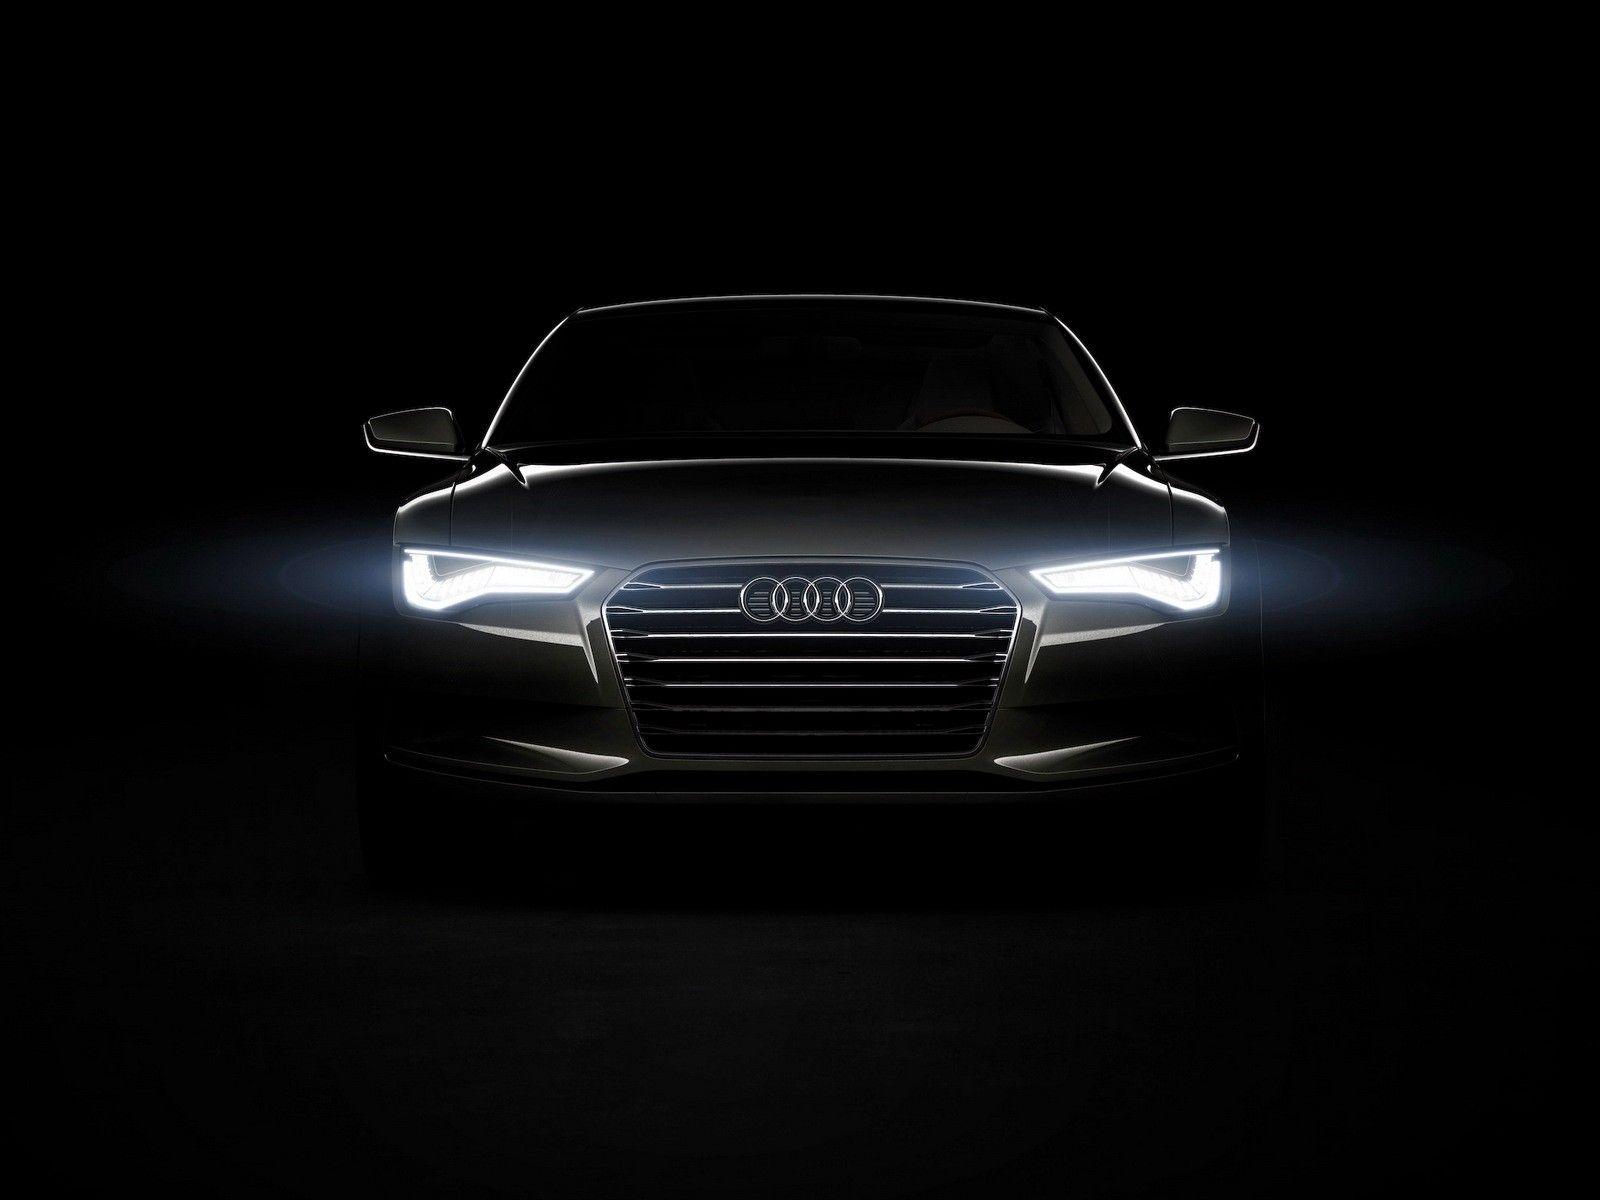 Cool Audi Wallpapers Top Free Cool Audi Backgrounds Wallpaperaccess